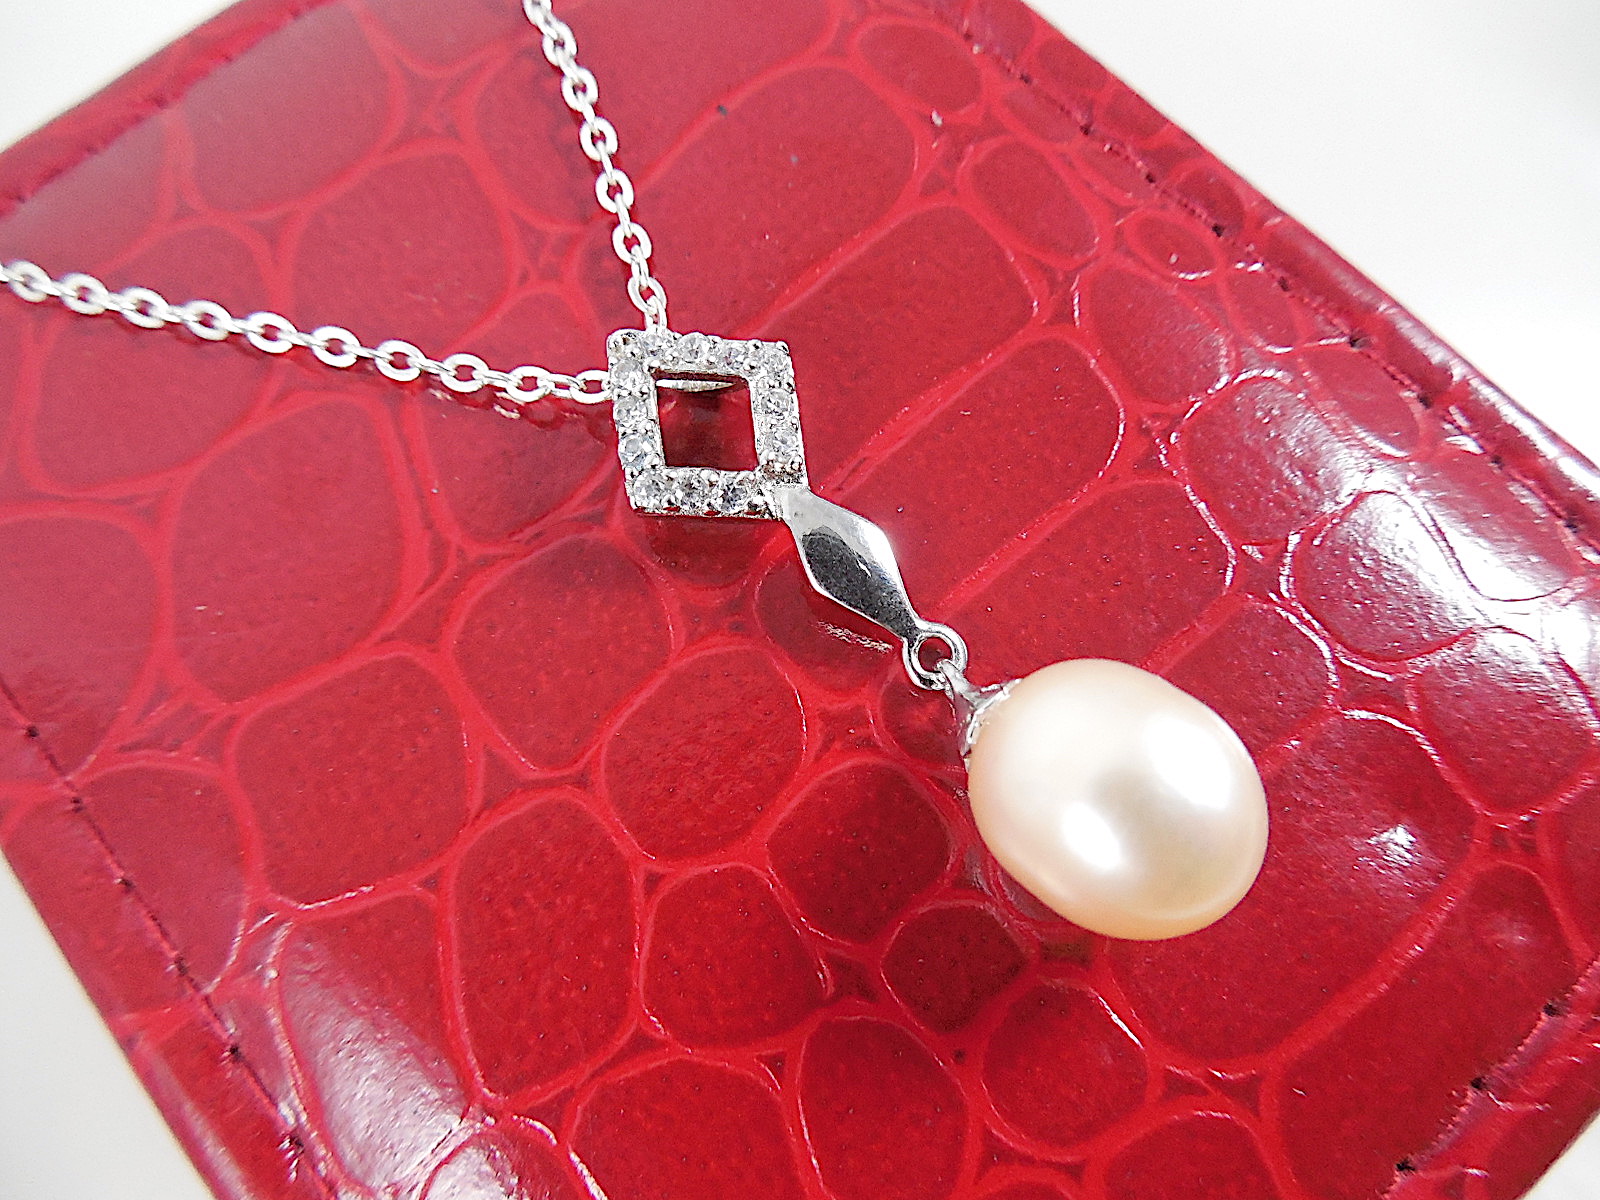 Silver necklace with Pearl pendant - Image 4 of 5